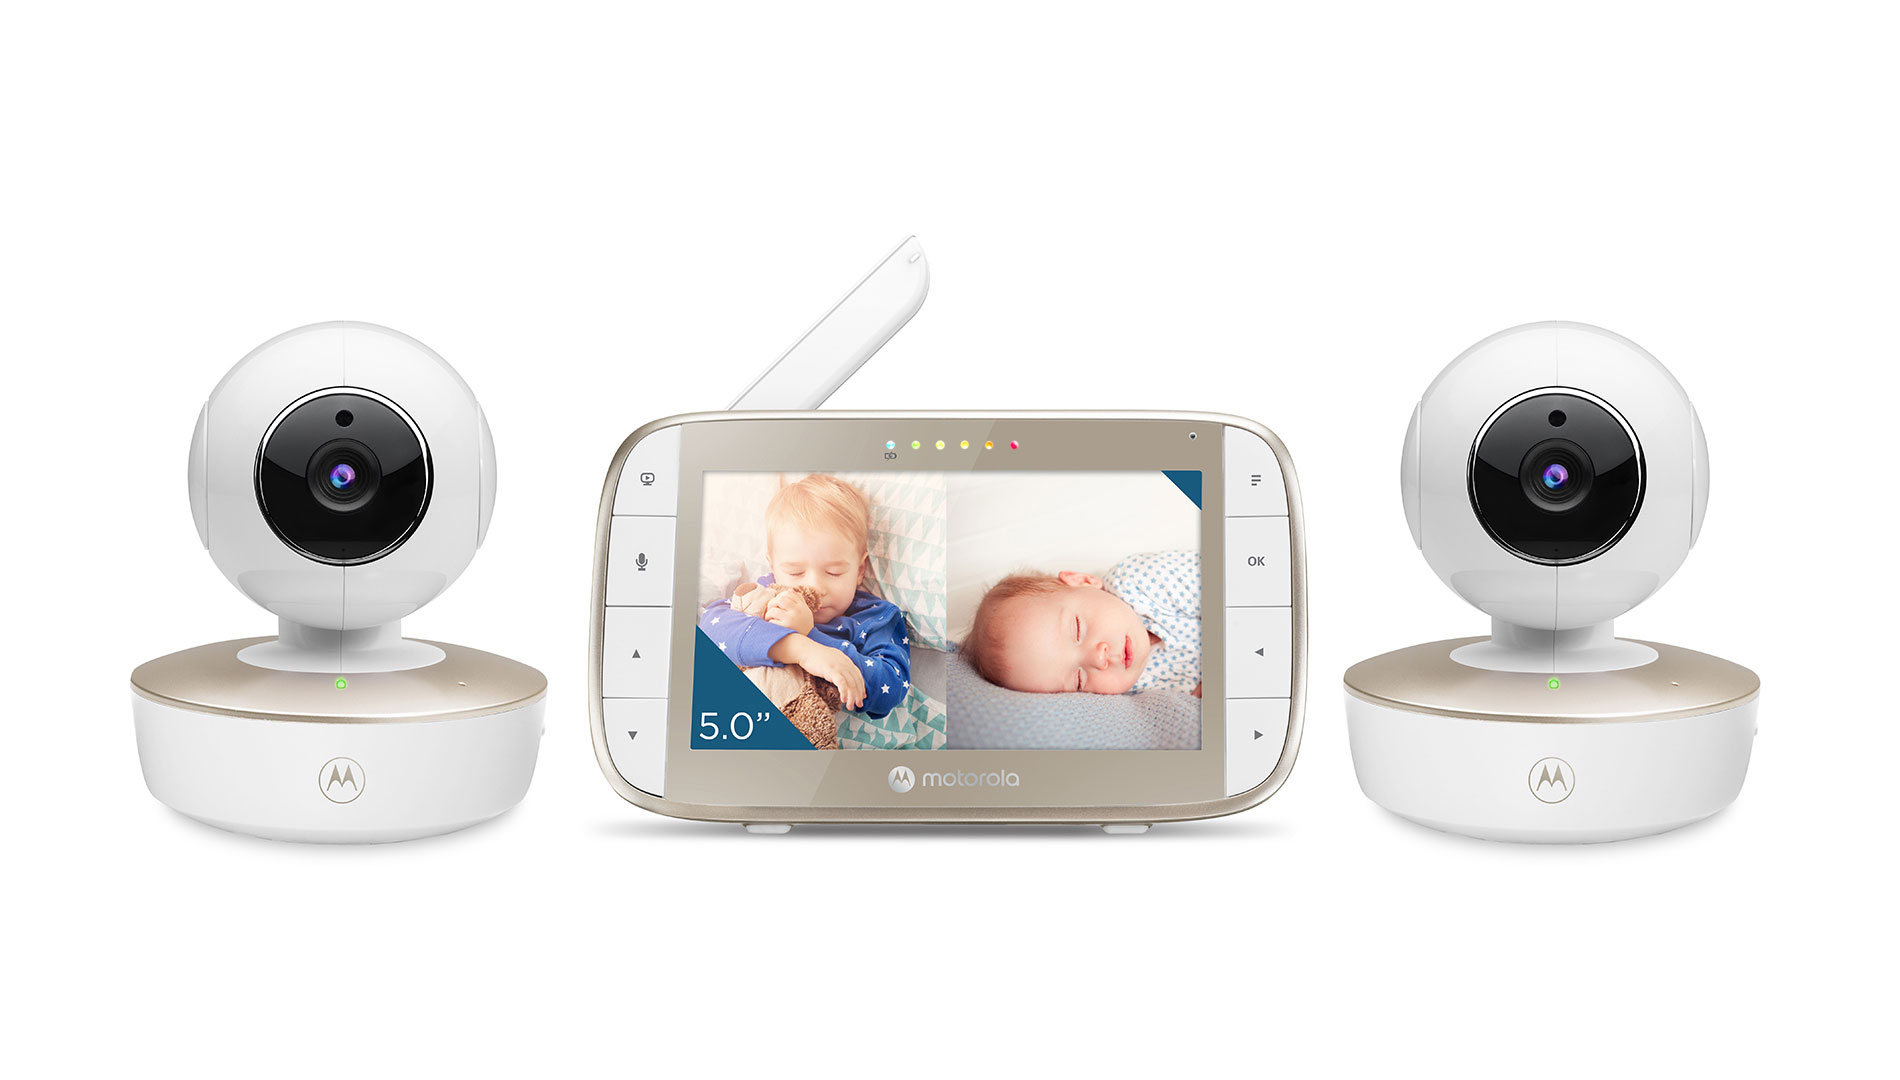 VM50g-2 Video Baby Monitor - 5" Split screen 2 way talk with room temp monitor - Product image